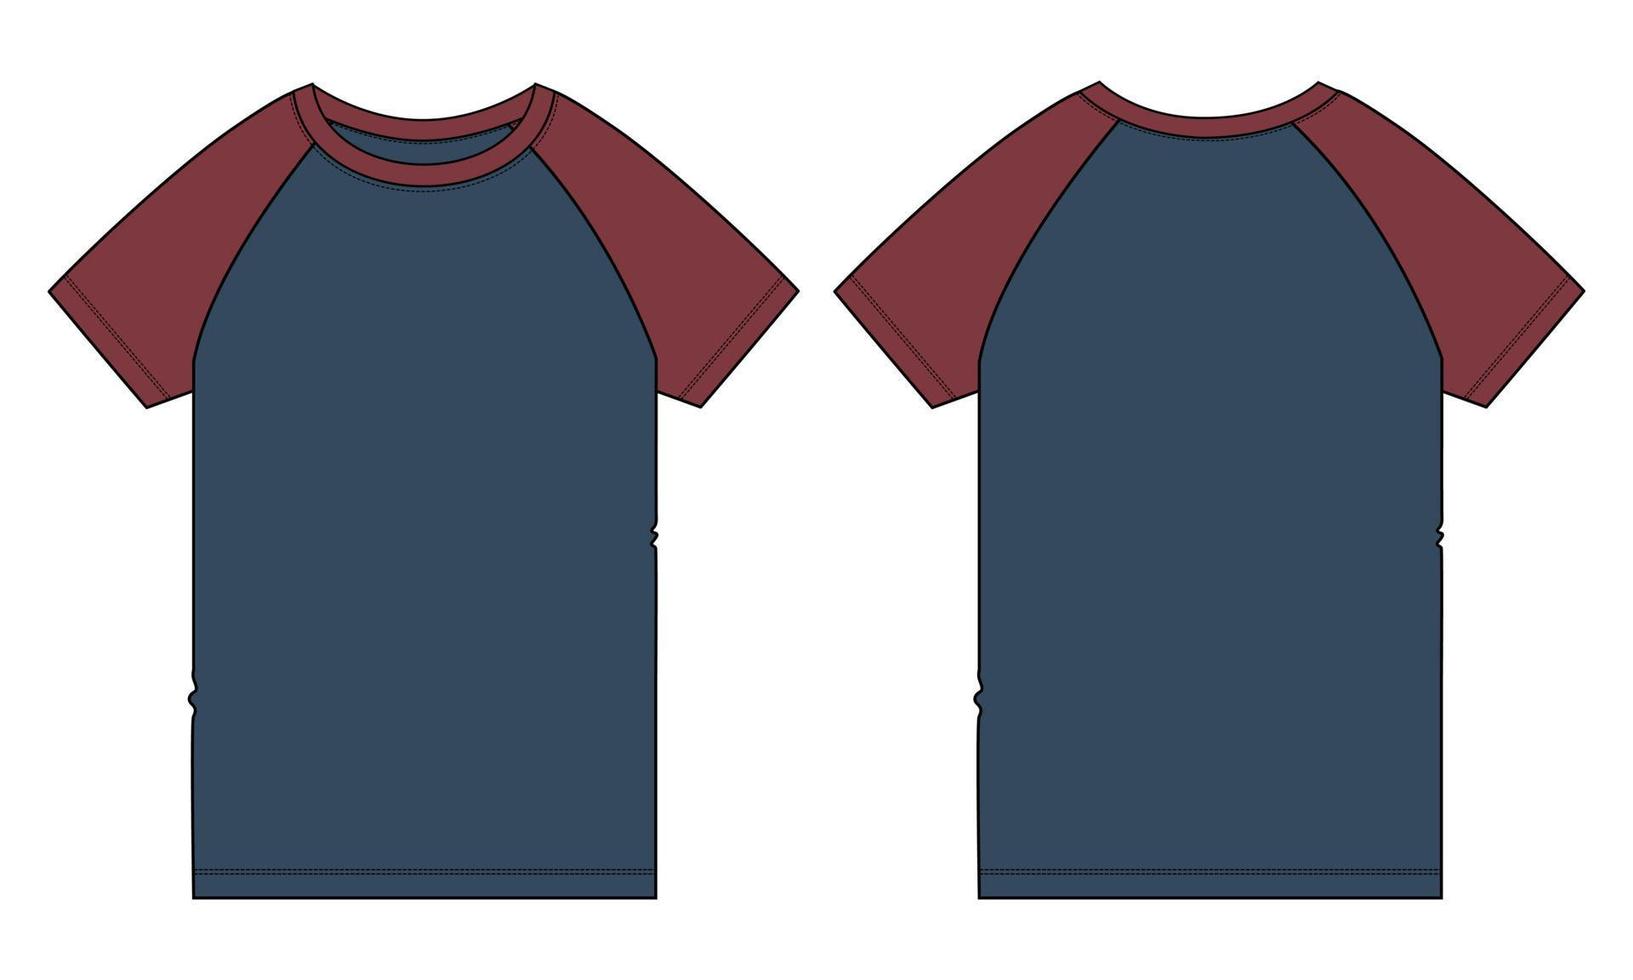 Two tone Red and Navy blue Color Short sleeve Raglan T shirt technical fashion flat sketch vector Illustration template front, back views isolated on White Background.